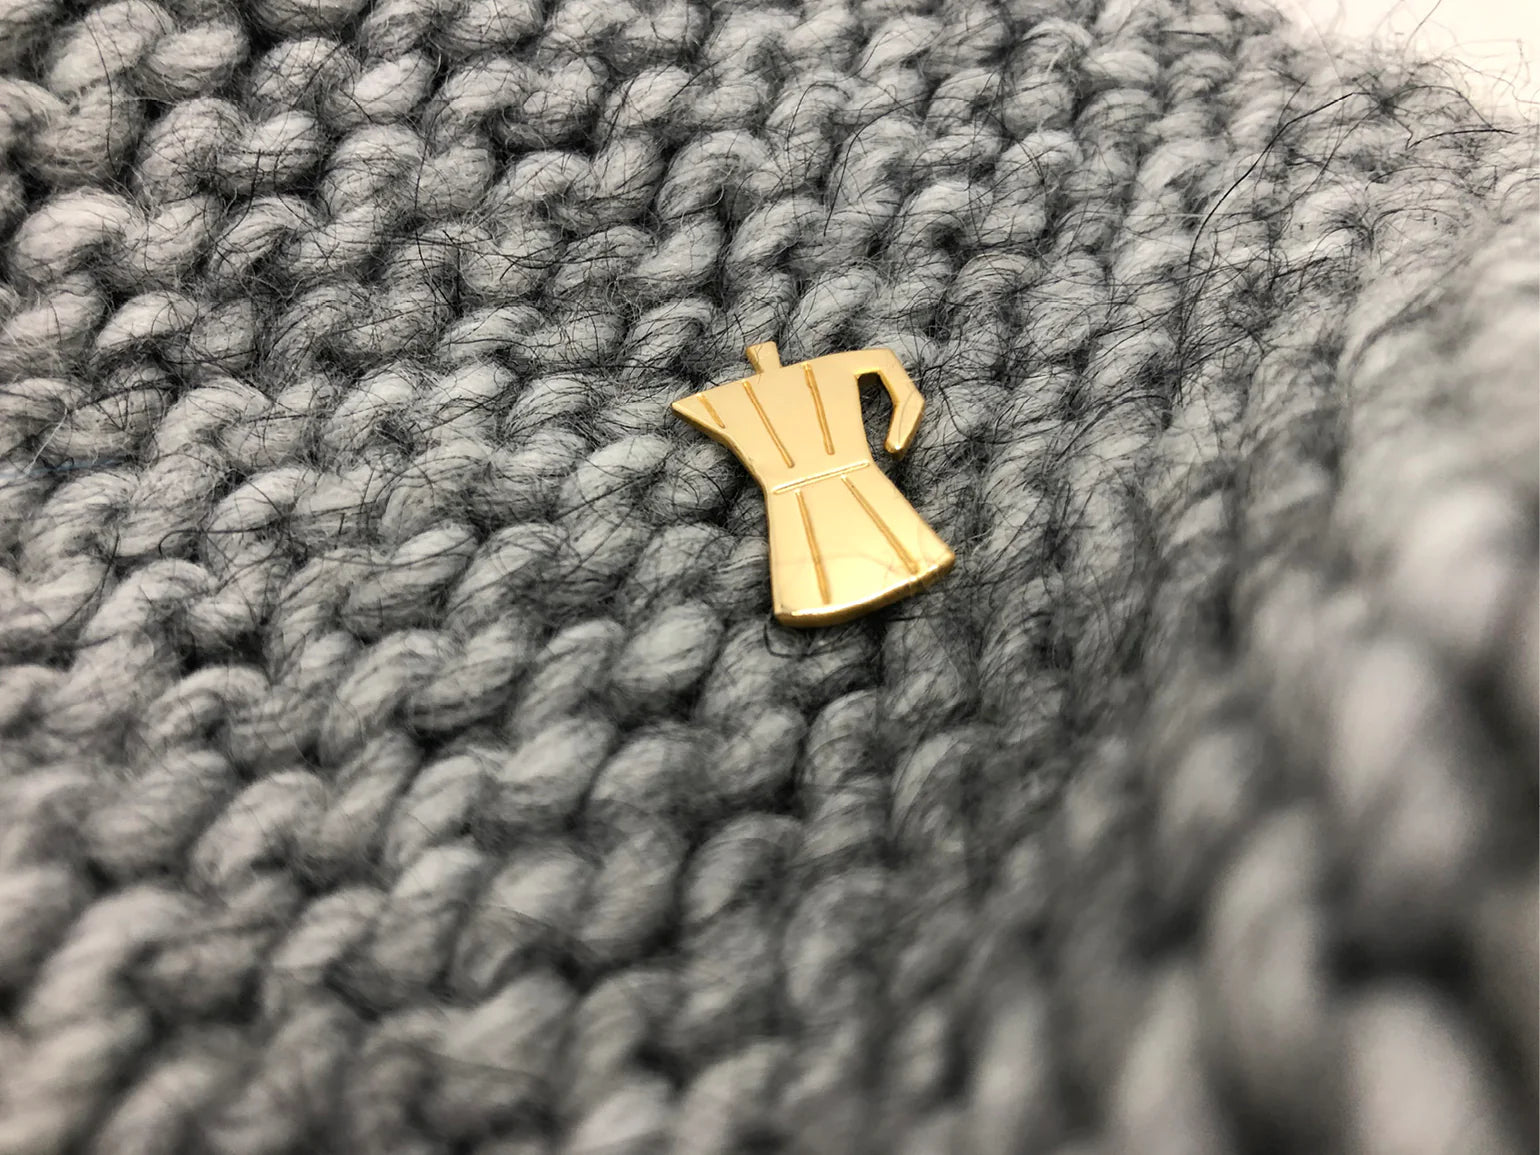 gold plated handmade coffee pot pin by Typealive, on grey knit